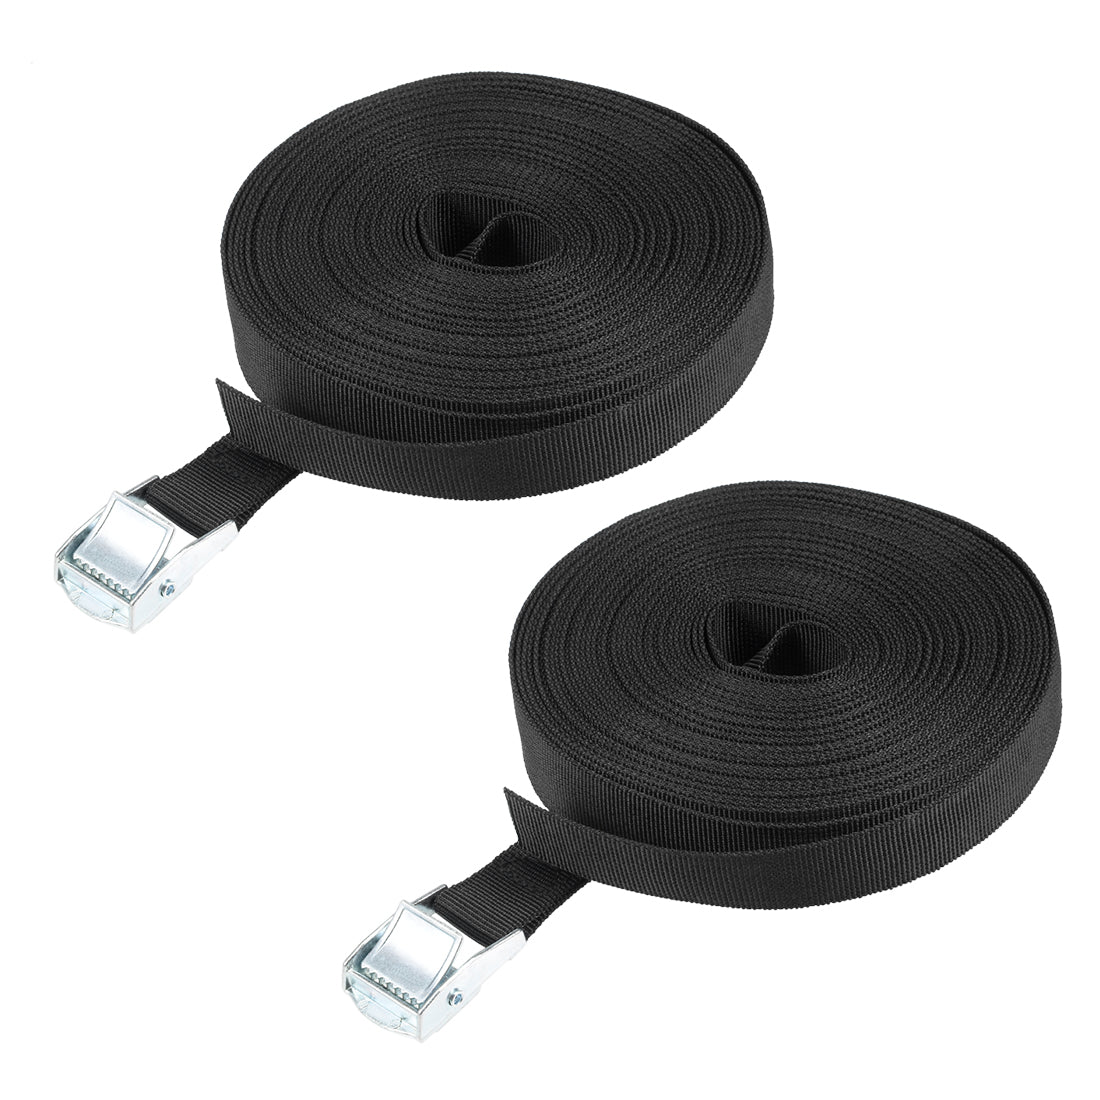 uxcell Uxcell 11M x 25mm Lashing Strap Cargo Tie Down Straps Buckle Up to 80Kg, Black, 2Pcs